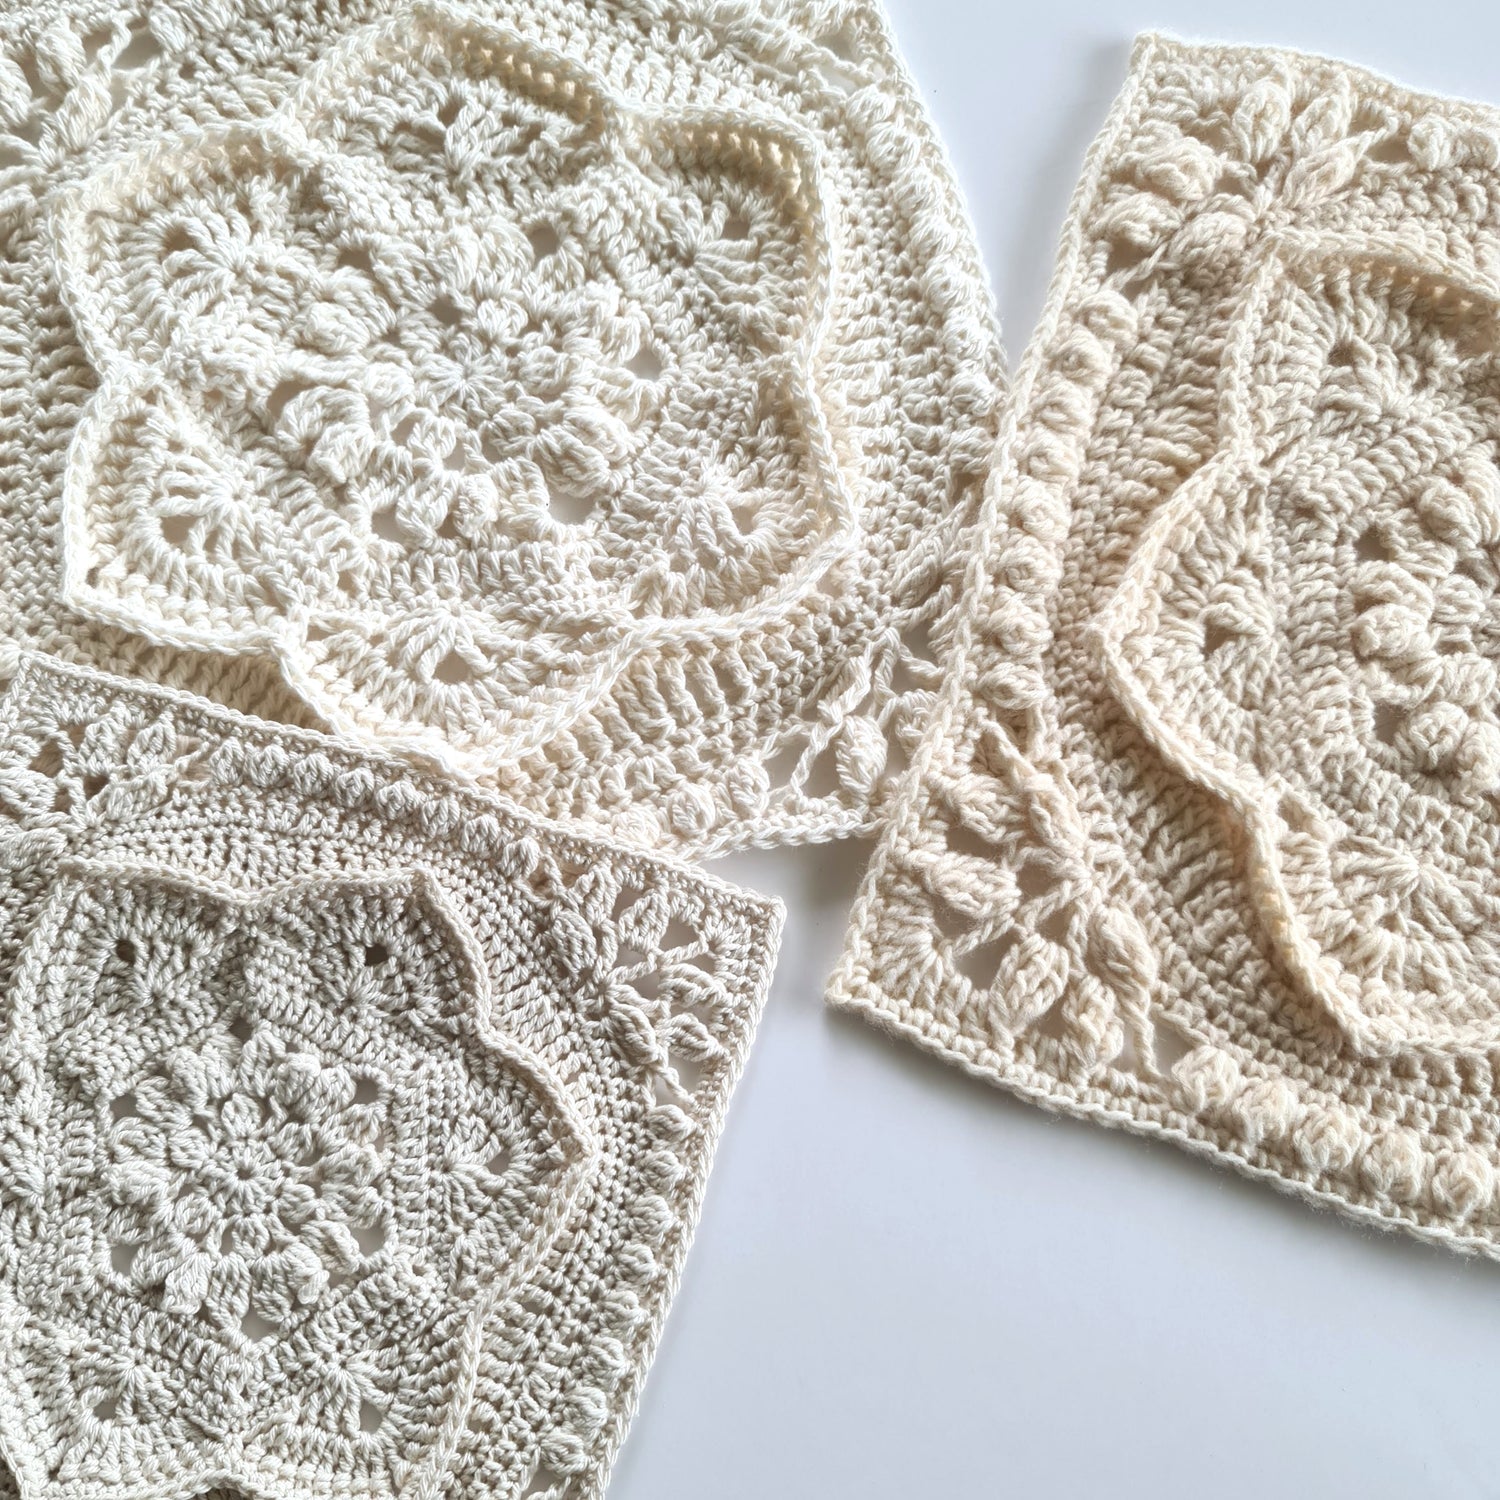 3 cream floral granny squares made with different yarns Asterales Crochet Granny Square Pattern by Shelley Husband